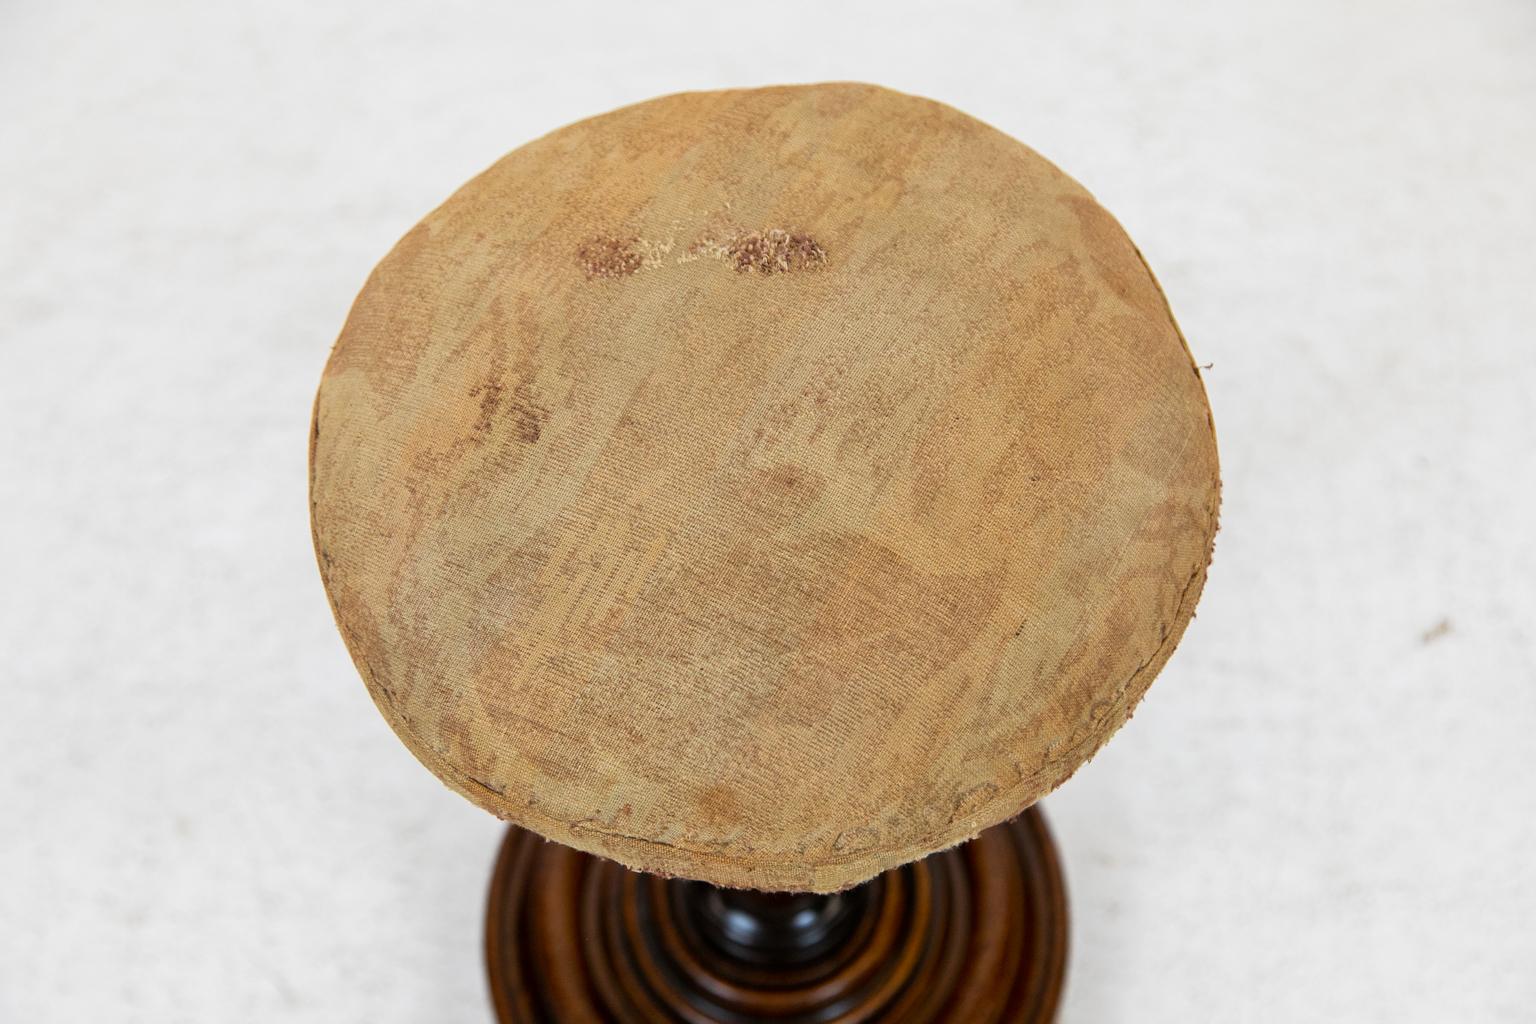 English mahogany stool, the stem has gun barrel turning on the base with concentric circle ogee molding. The upholstery is well worn.